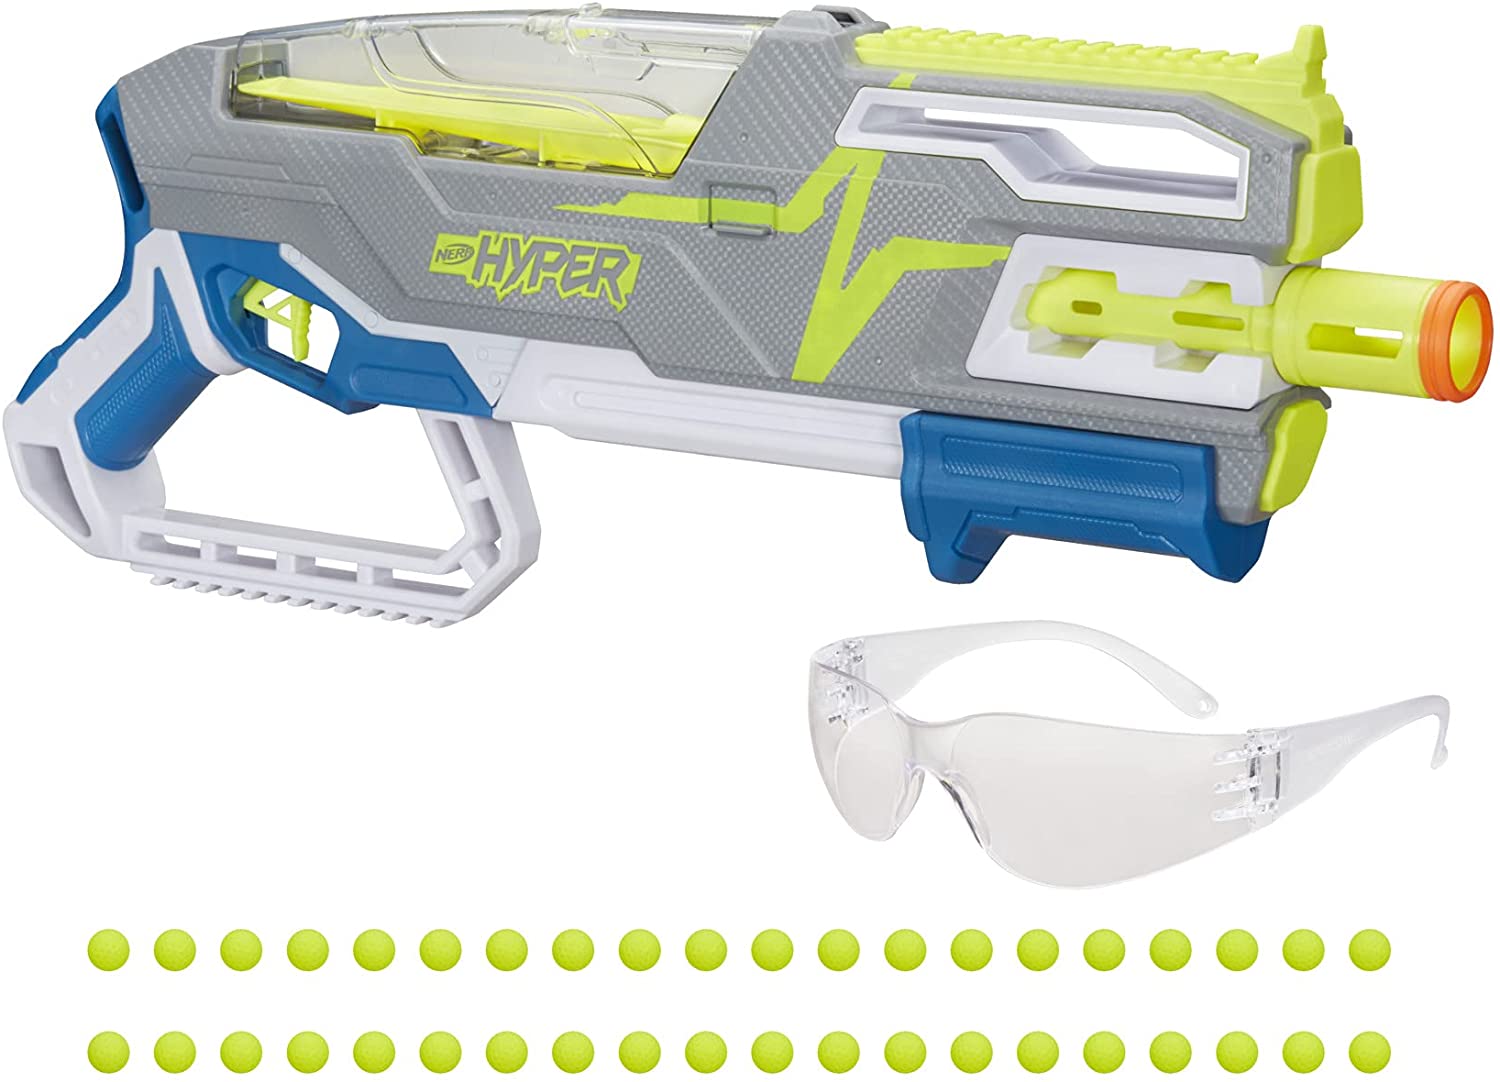 Nerf Hyper Siege-50 Pump-Action Blaster - Up to 110 FPS Velocity, Easy Reload, 50- Round Capacity